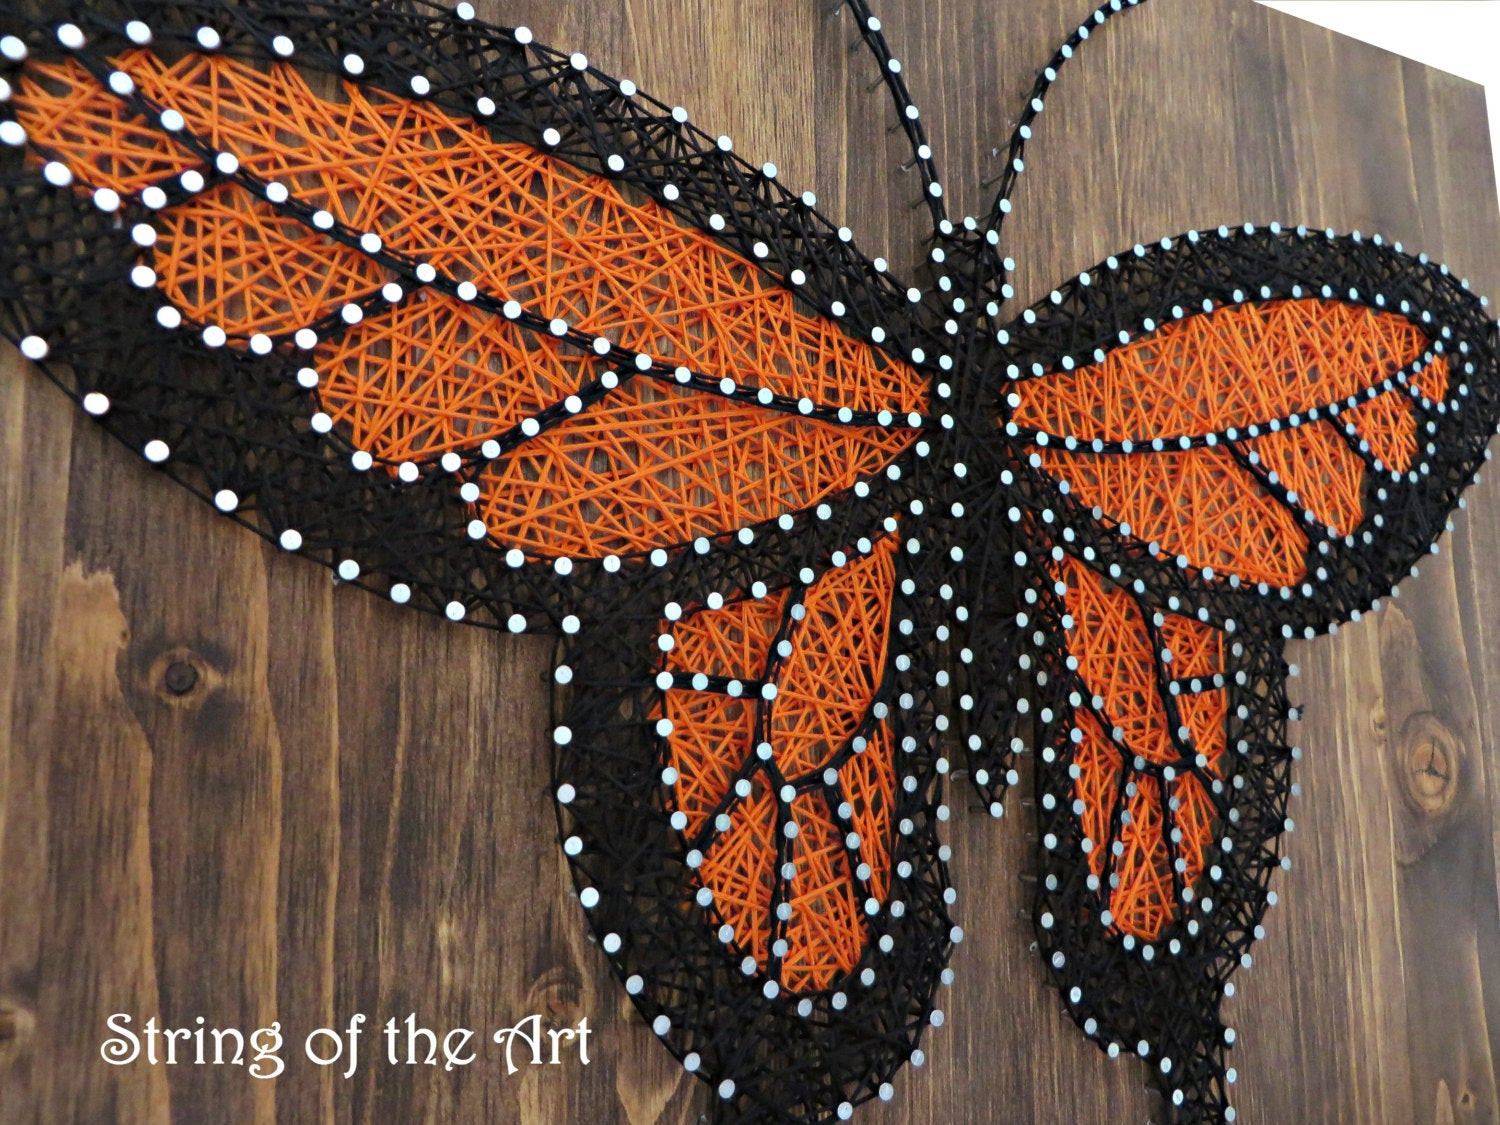 Wood Craft Kits For Adults
 Butterfly String Art Kit Adult Crafts Kit DIY String Art